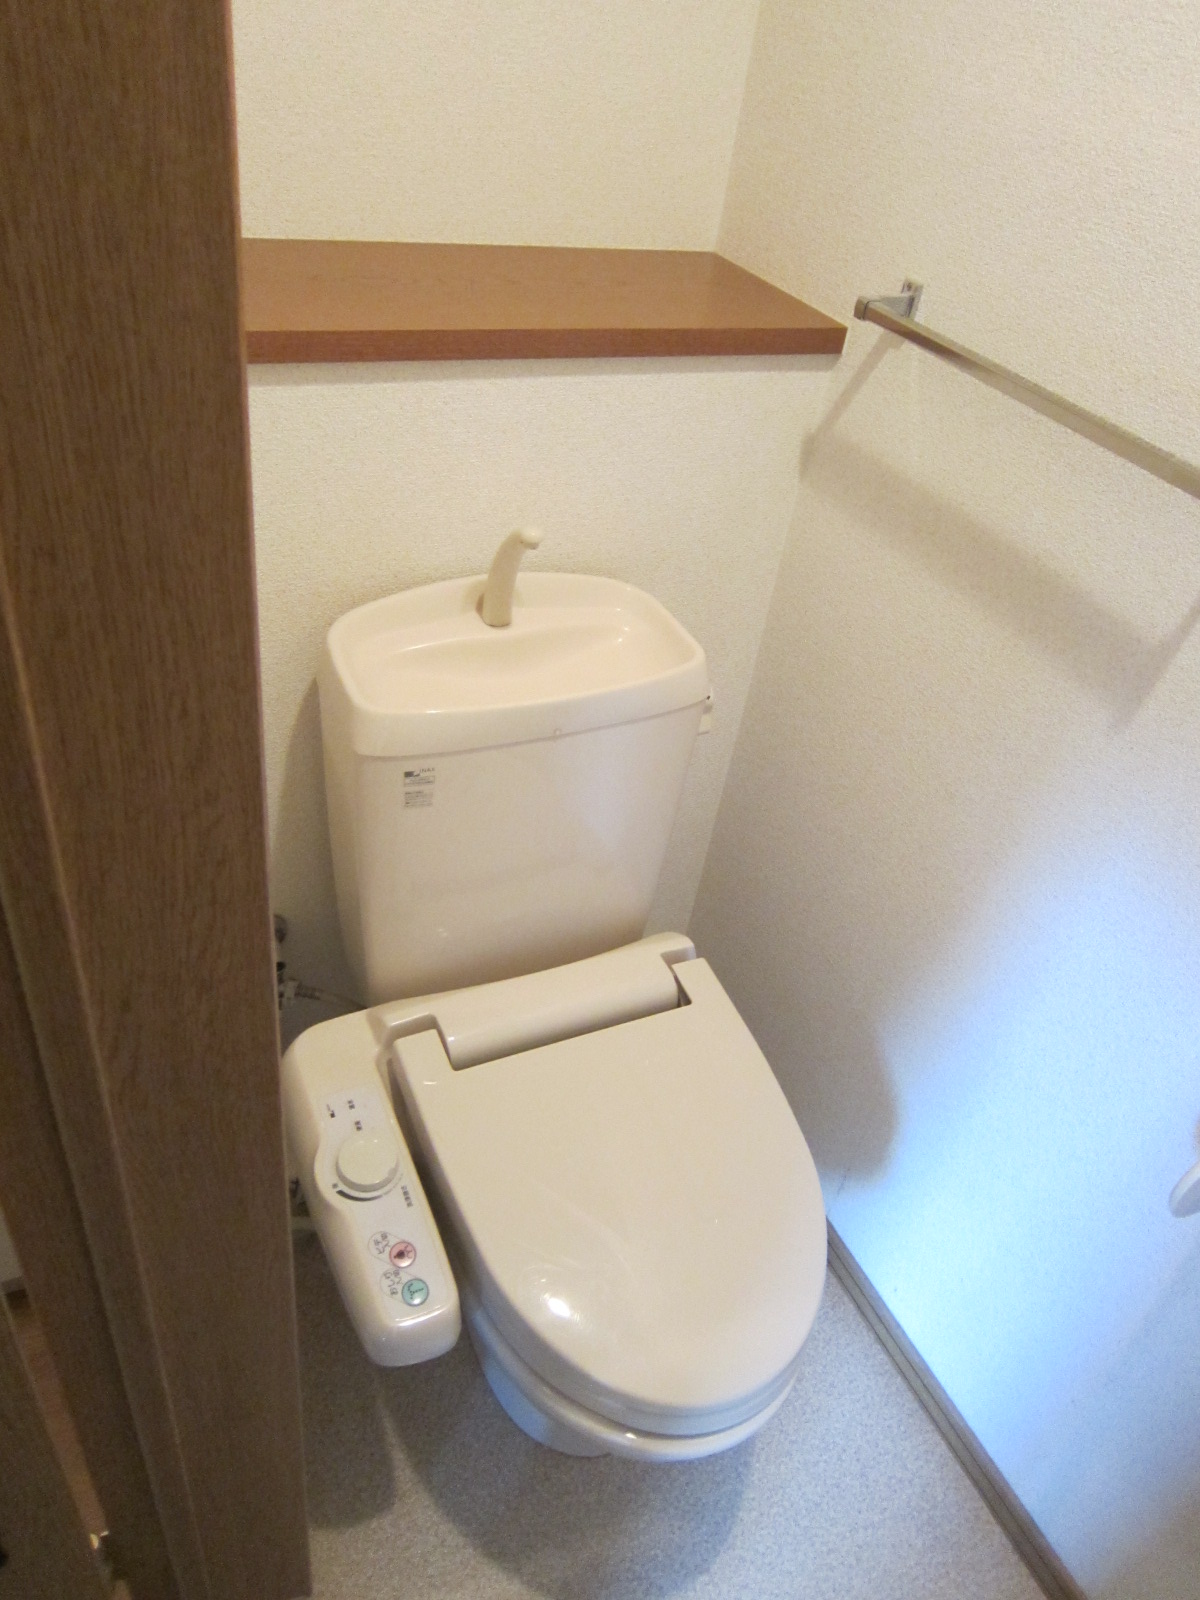 Toilet. Heating with cleaning toilet seat